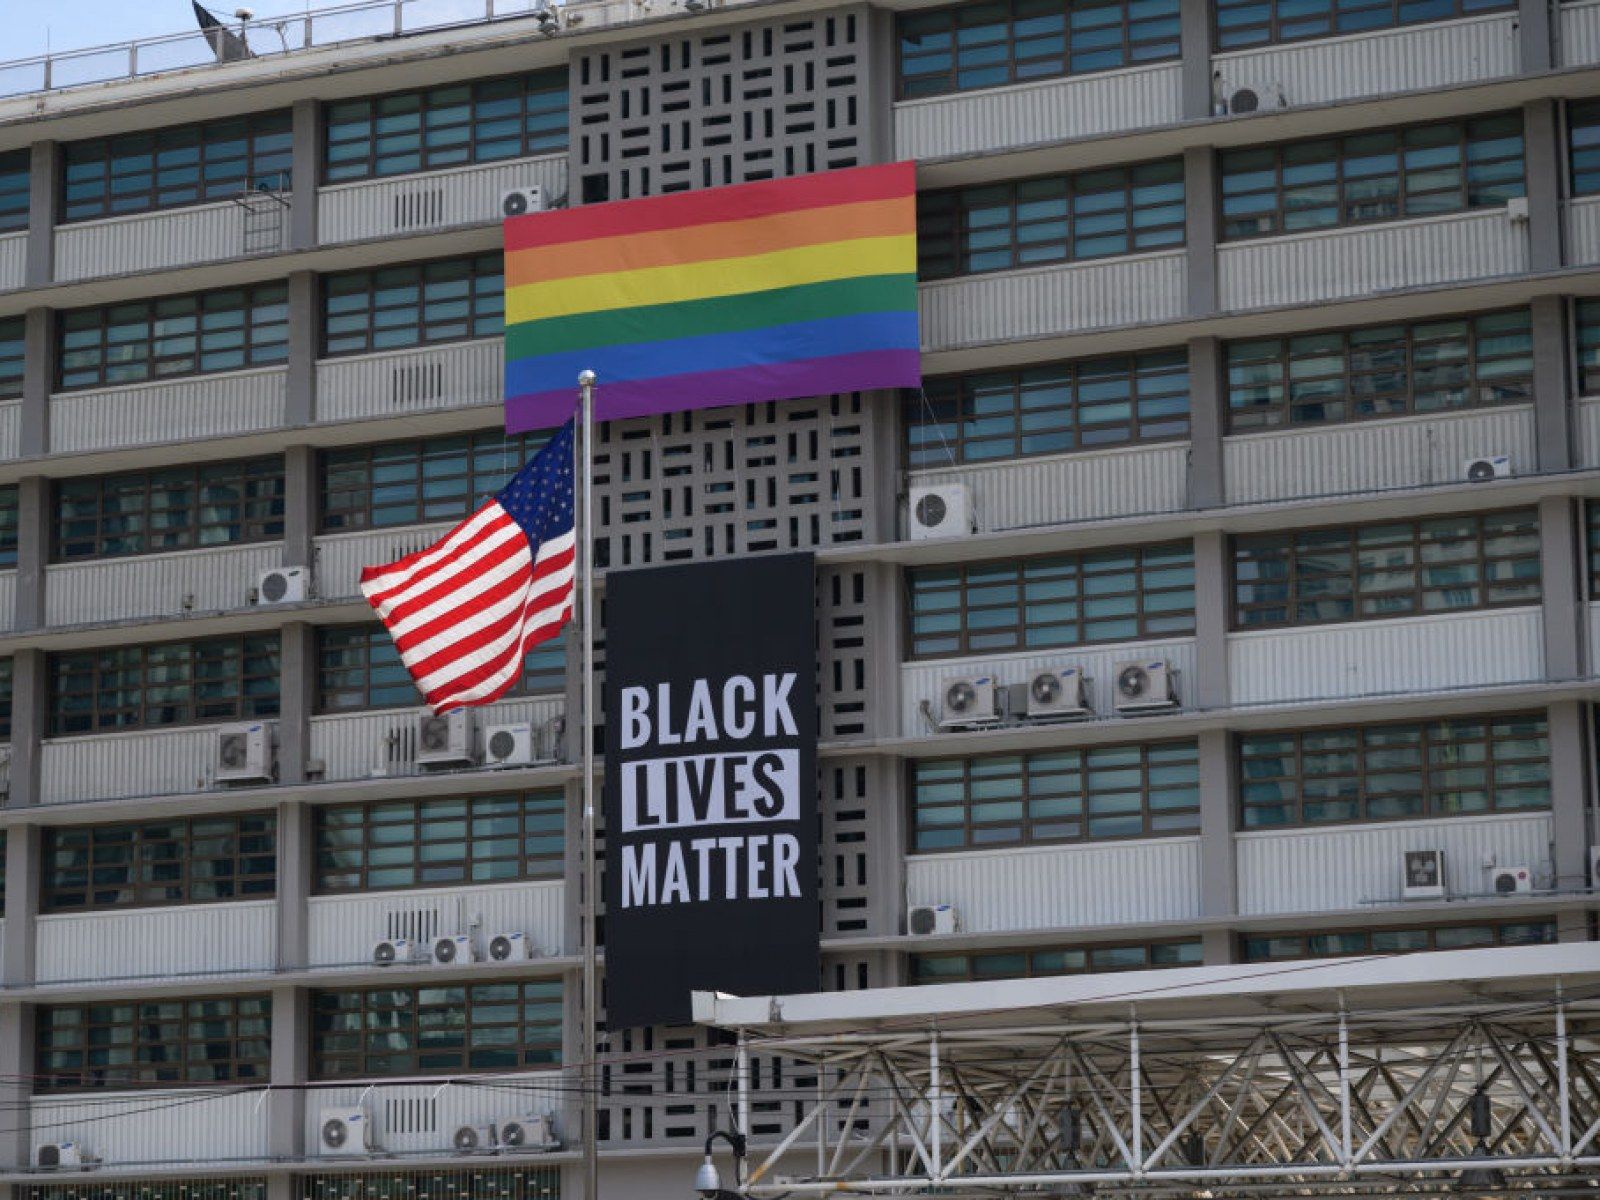 Black Lives Matter and LGBTQ Pride Banners Removed From U.S. Embassy in South Korea